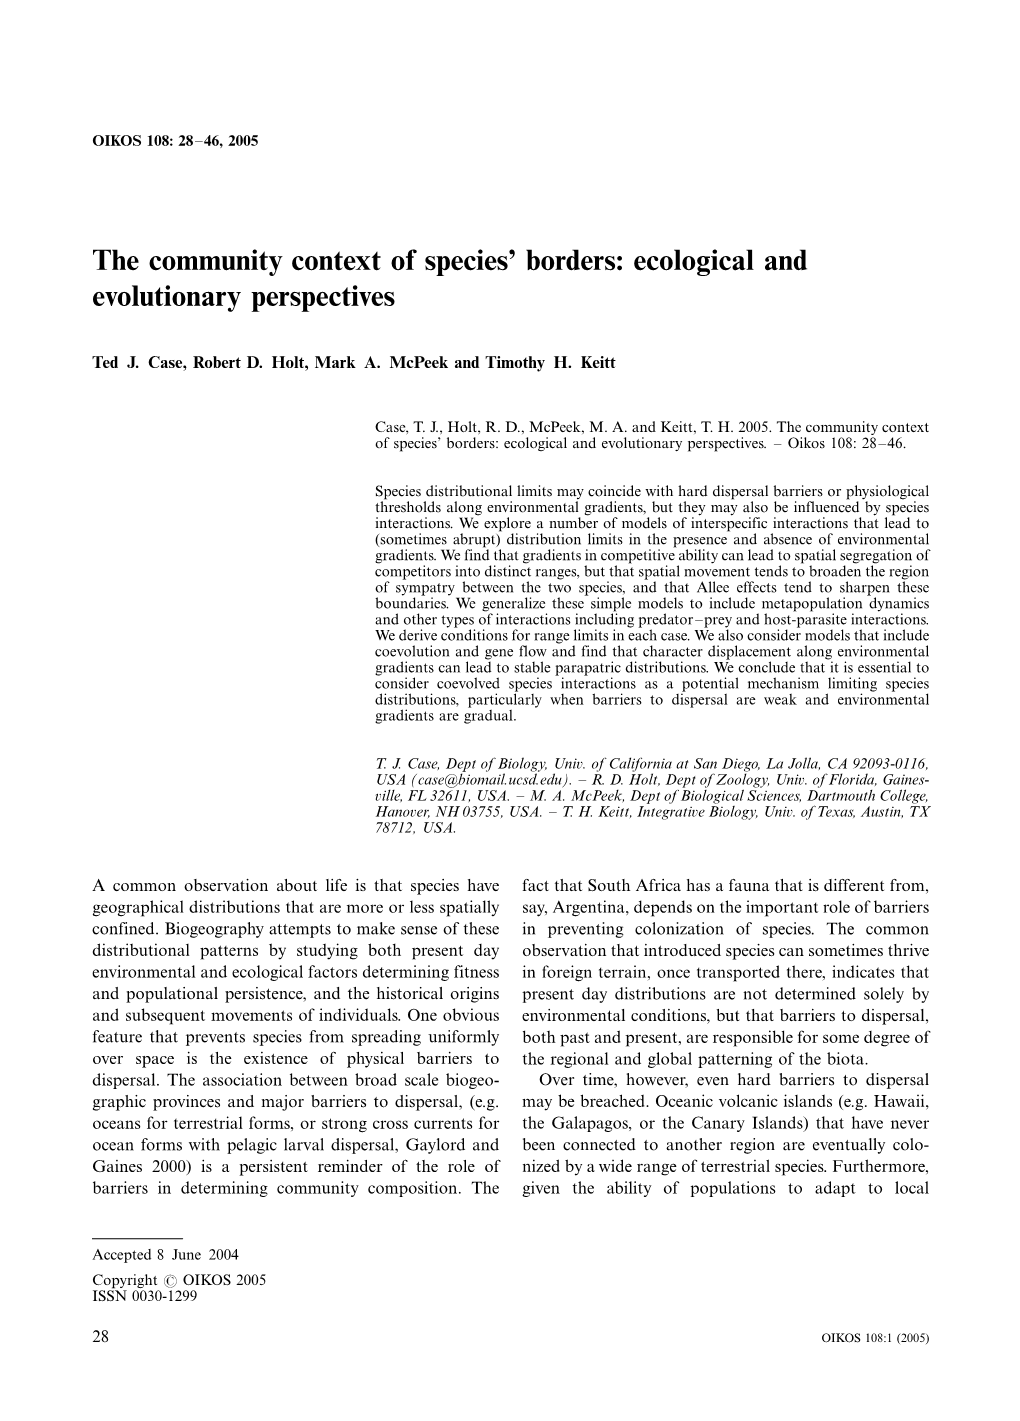 The Community Context of Species' Borders: Ecological And